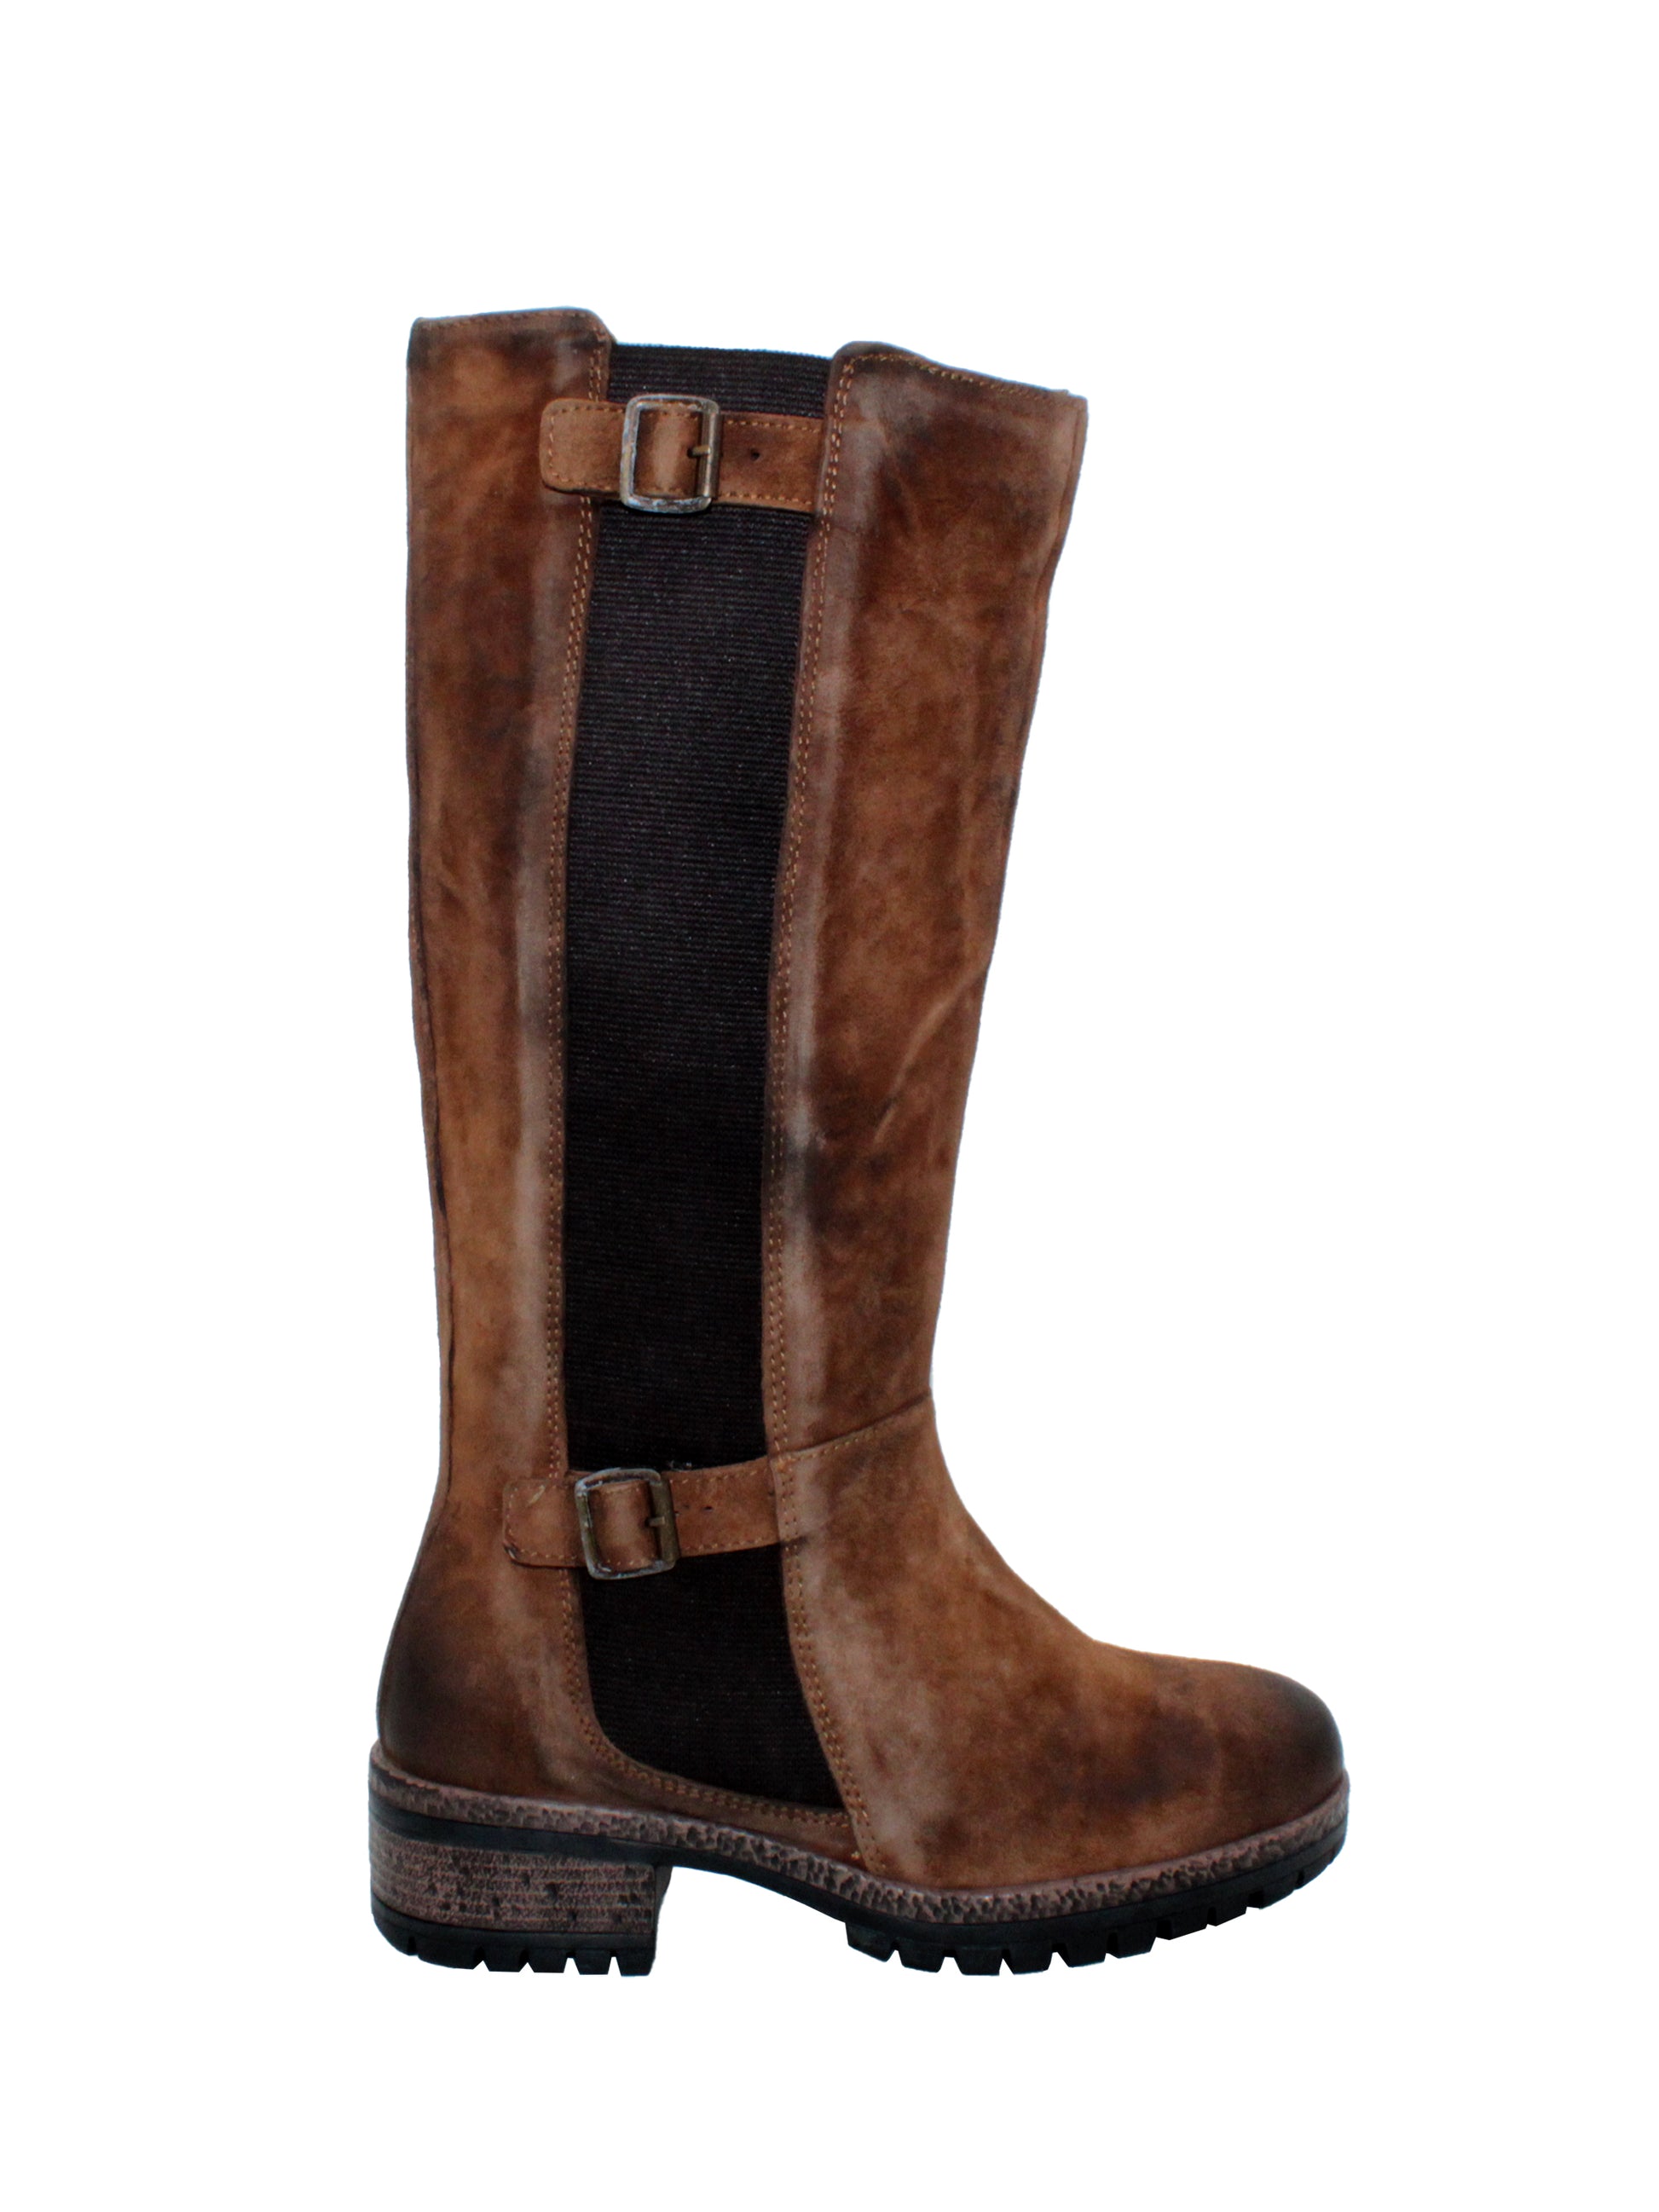 Very Volatile’s ‘Mitchell’ lug bottom boots are tough yet chic, bold yet ultra-versatile, and set on comfortable, chunky lug soles. Featuring adjustable double buckle accents with elastic goring, partial inside zipper, so all you need to use is the zipper to slip these on and go. Pair these with everything from cropped trousers to satin slip dresses. cognac